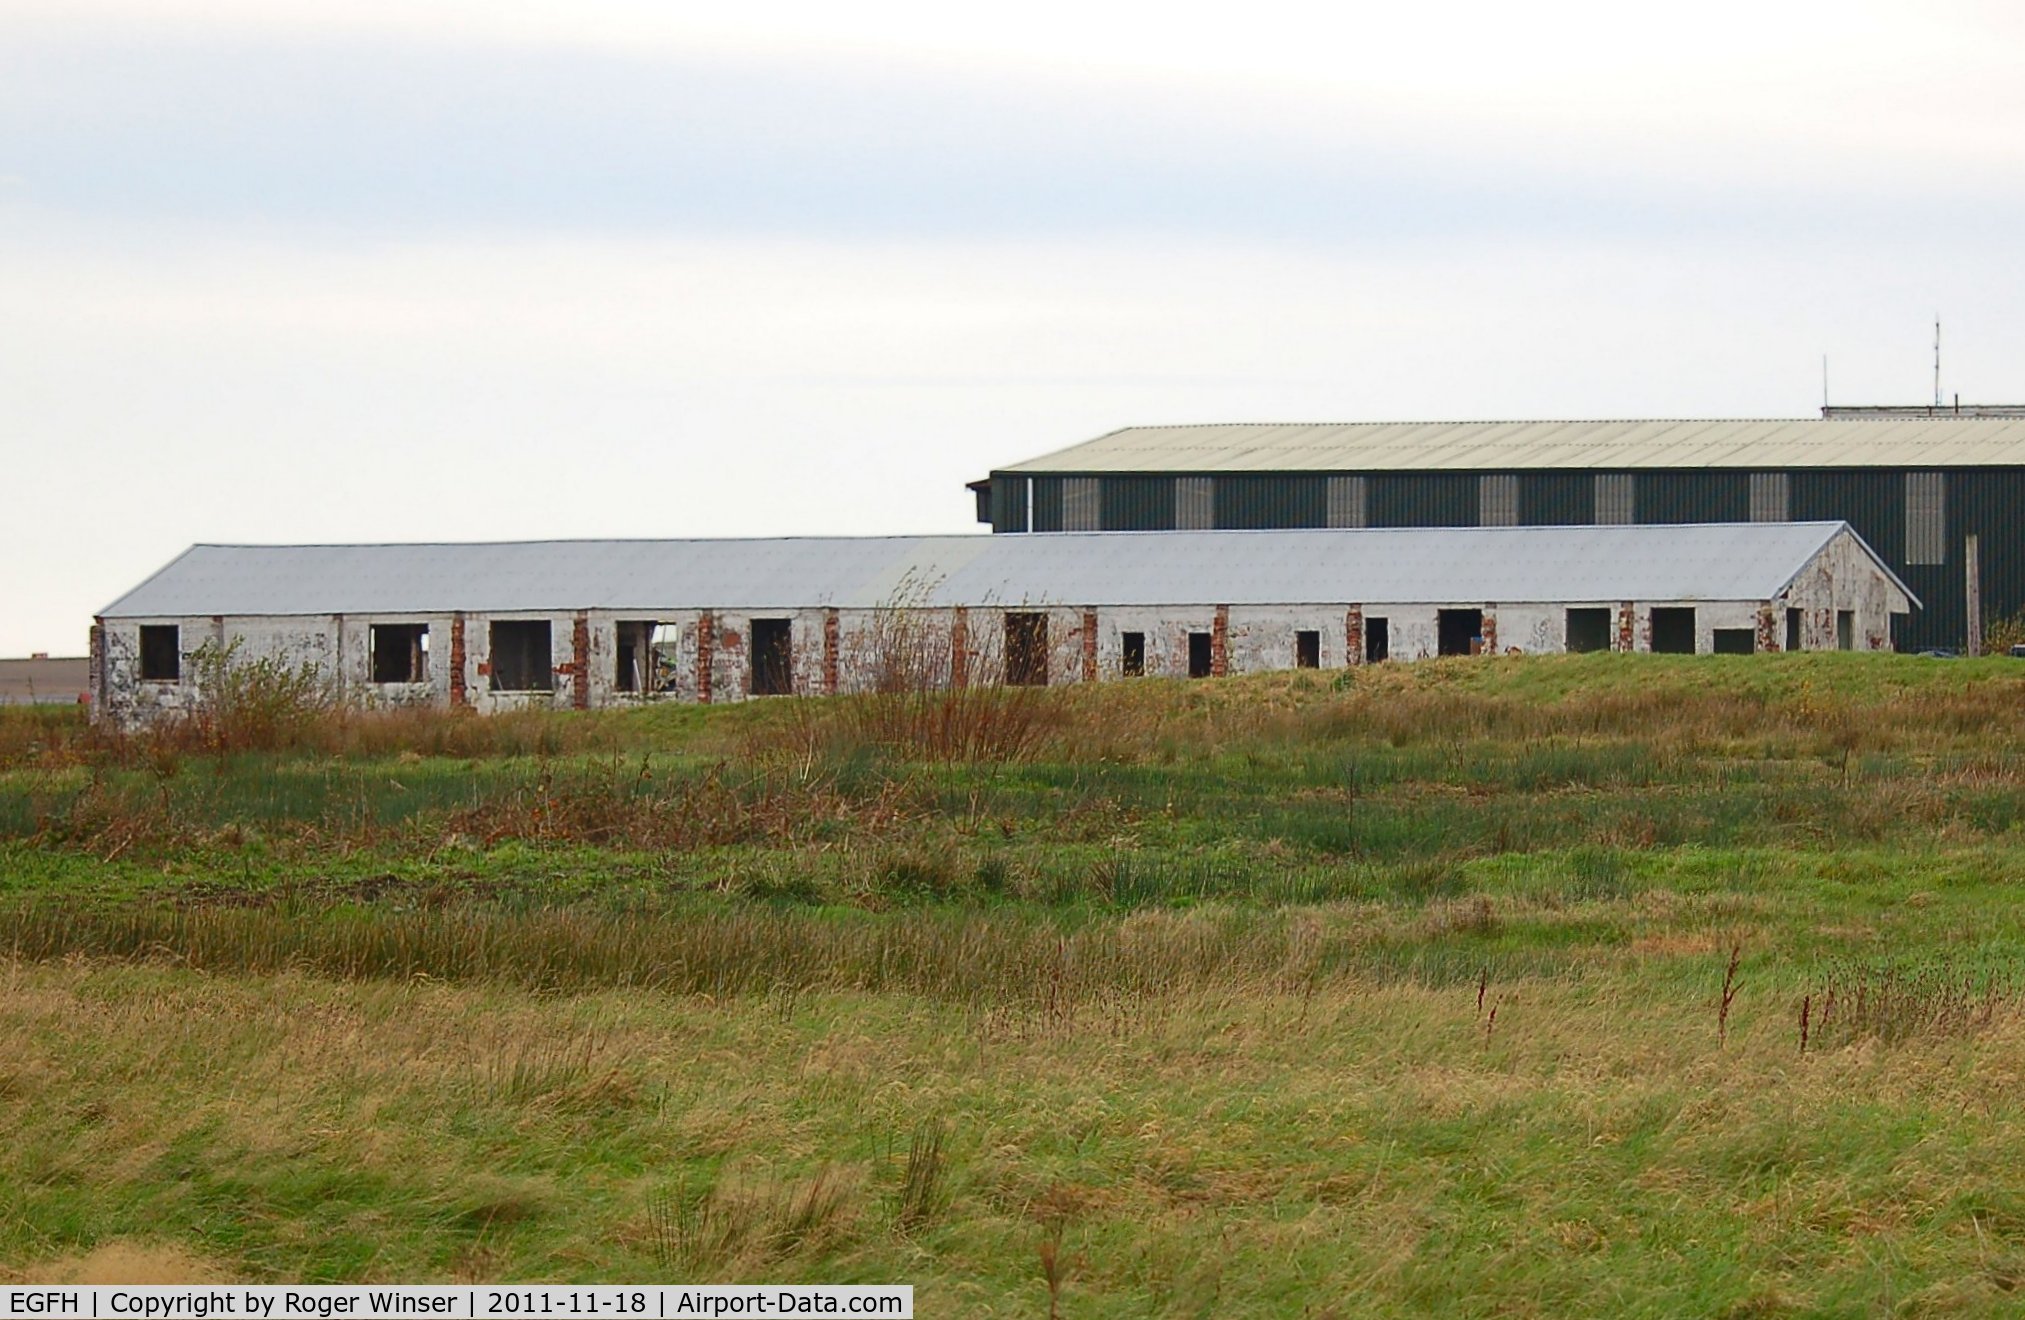 Swansea Airport, Swansea, Wales United Kingdom (EGFH) - Former RAF squadron offices built in 1941. 